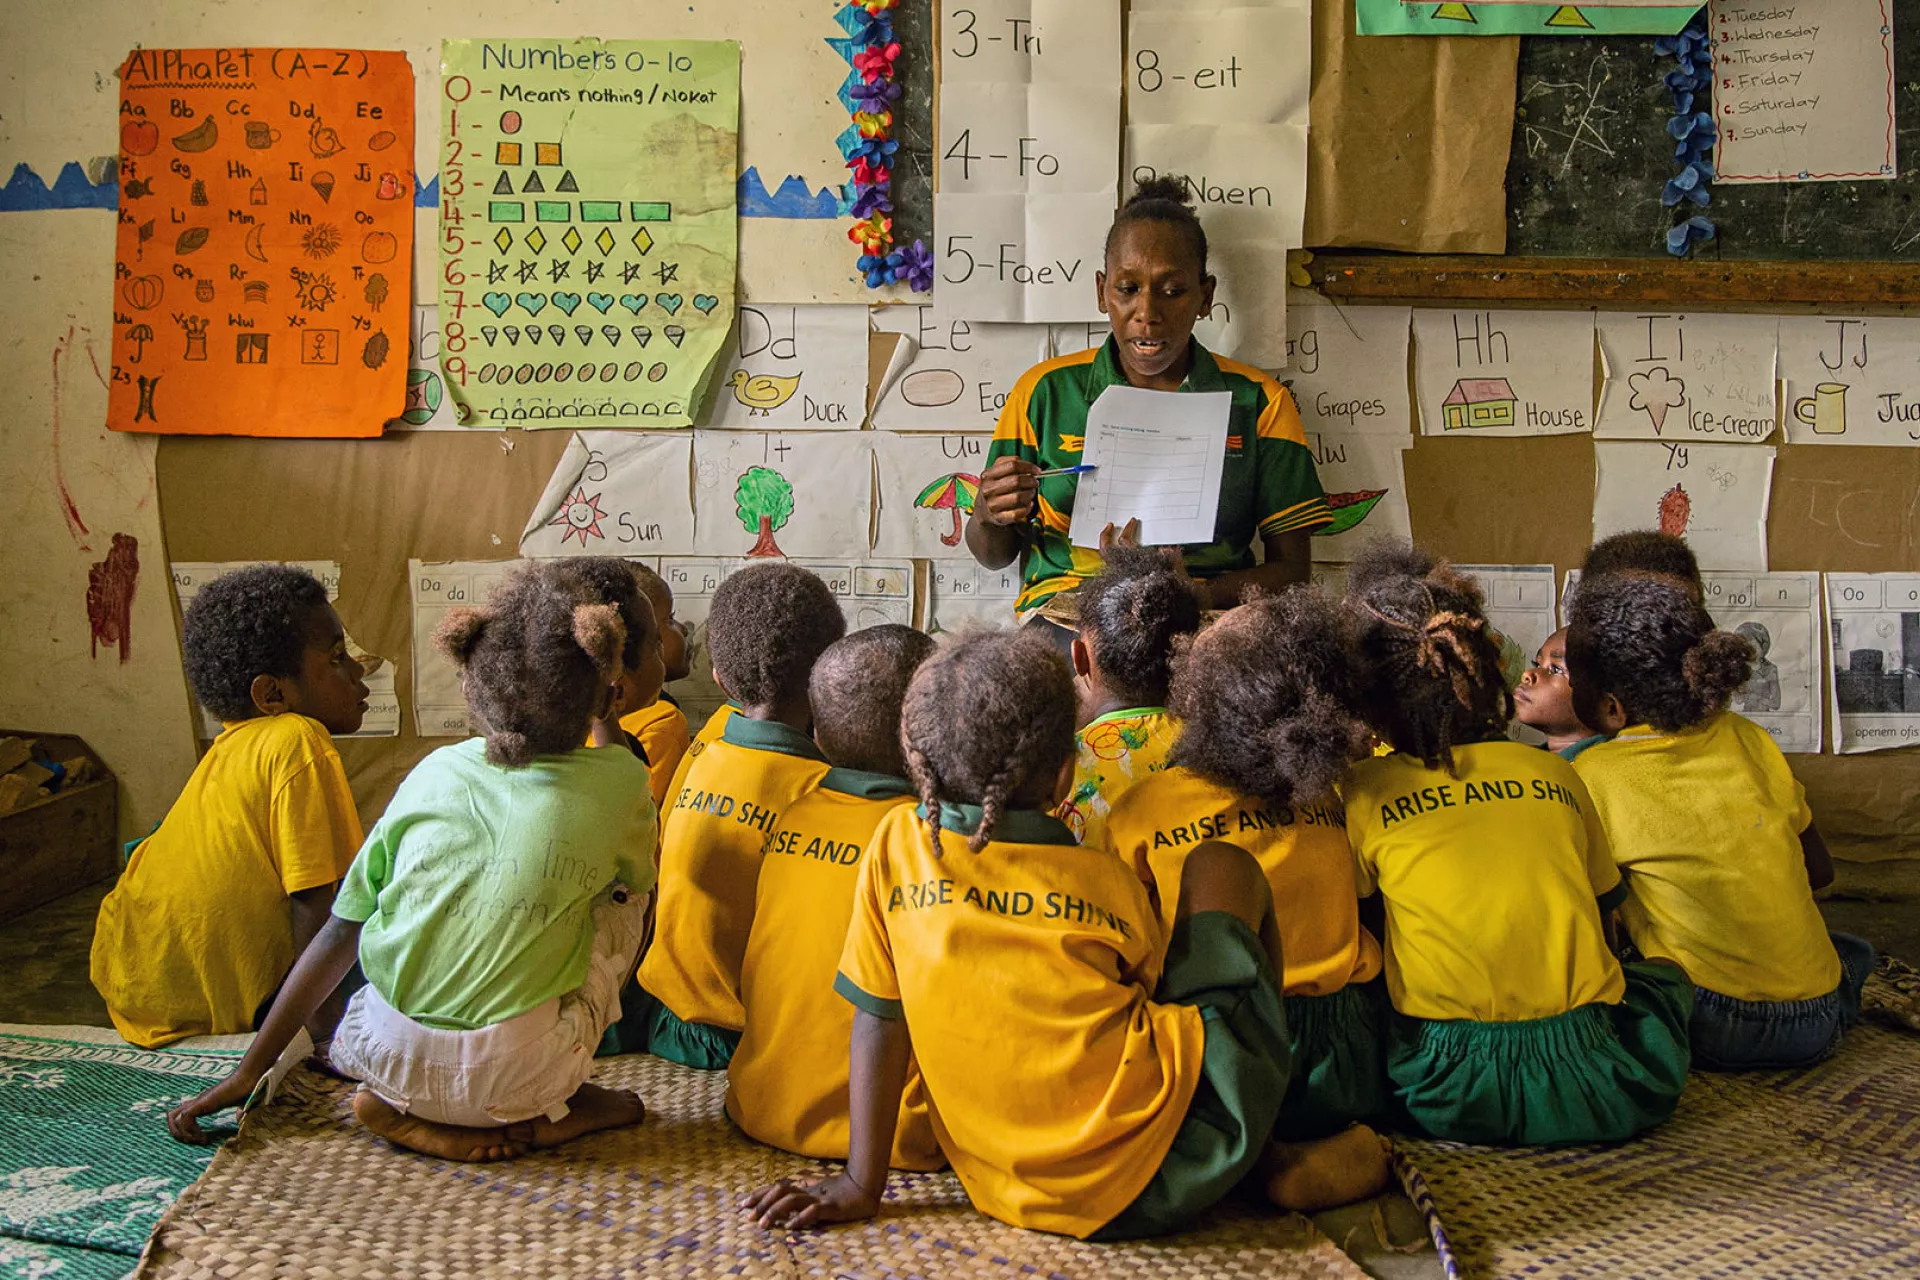 A teacher reading to her students in a mainstream classroom during a group activity, Vanuatu